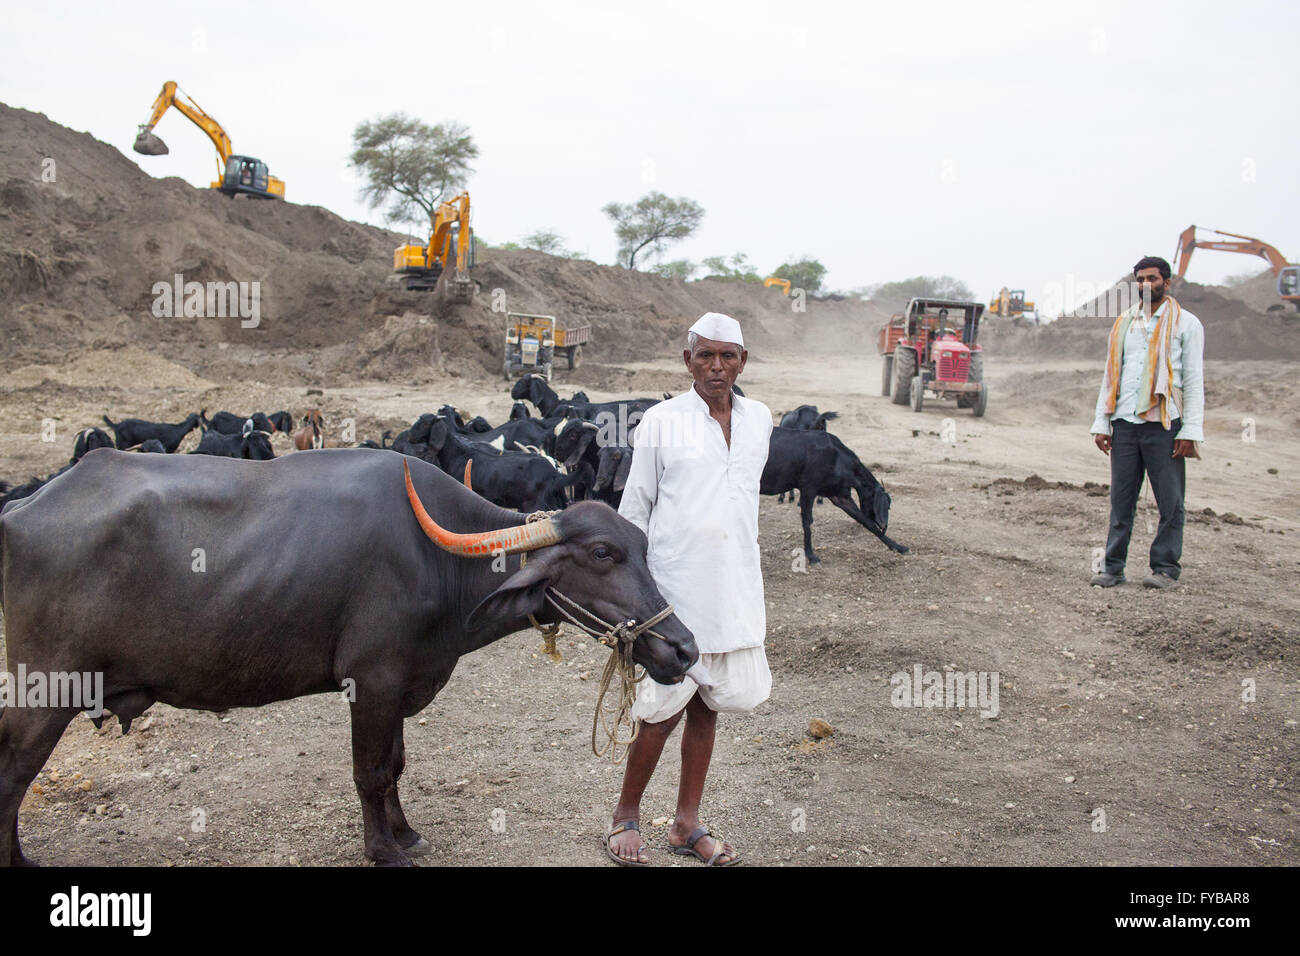 Latur, Maharashtra. 20th Apr, 2016. 20 April 2016 - Latur - INDIA.Farmer Balasahab Kale, 60, from Sai, outside of the town of Latur, with his buffalo.The administration has started widening & deepening the Sai river for water harvesting. © Subhash Sharma/ZUMA Wire/Alamy Live News Stock Photo